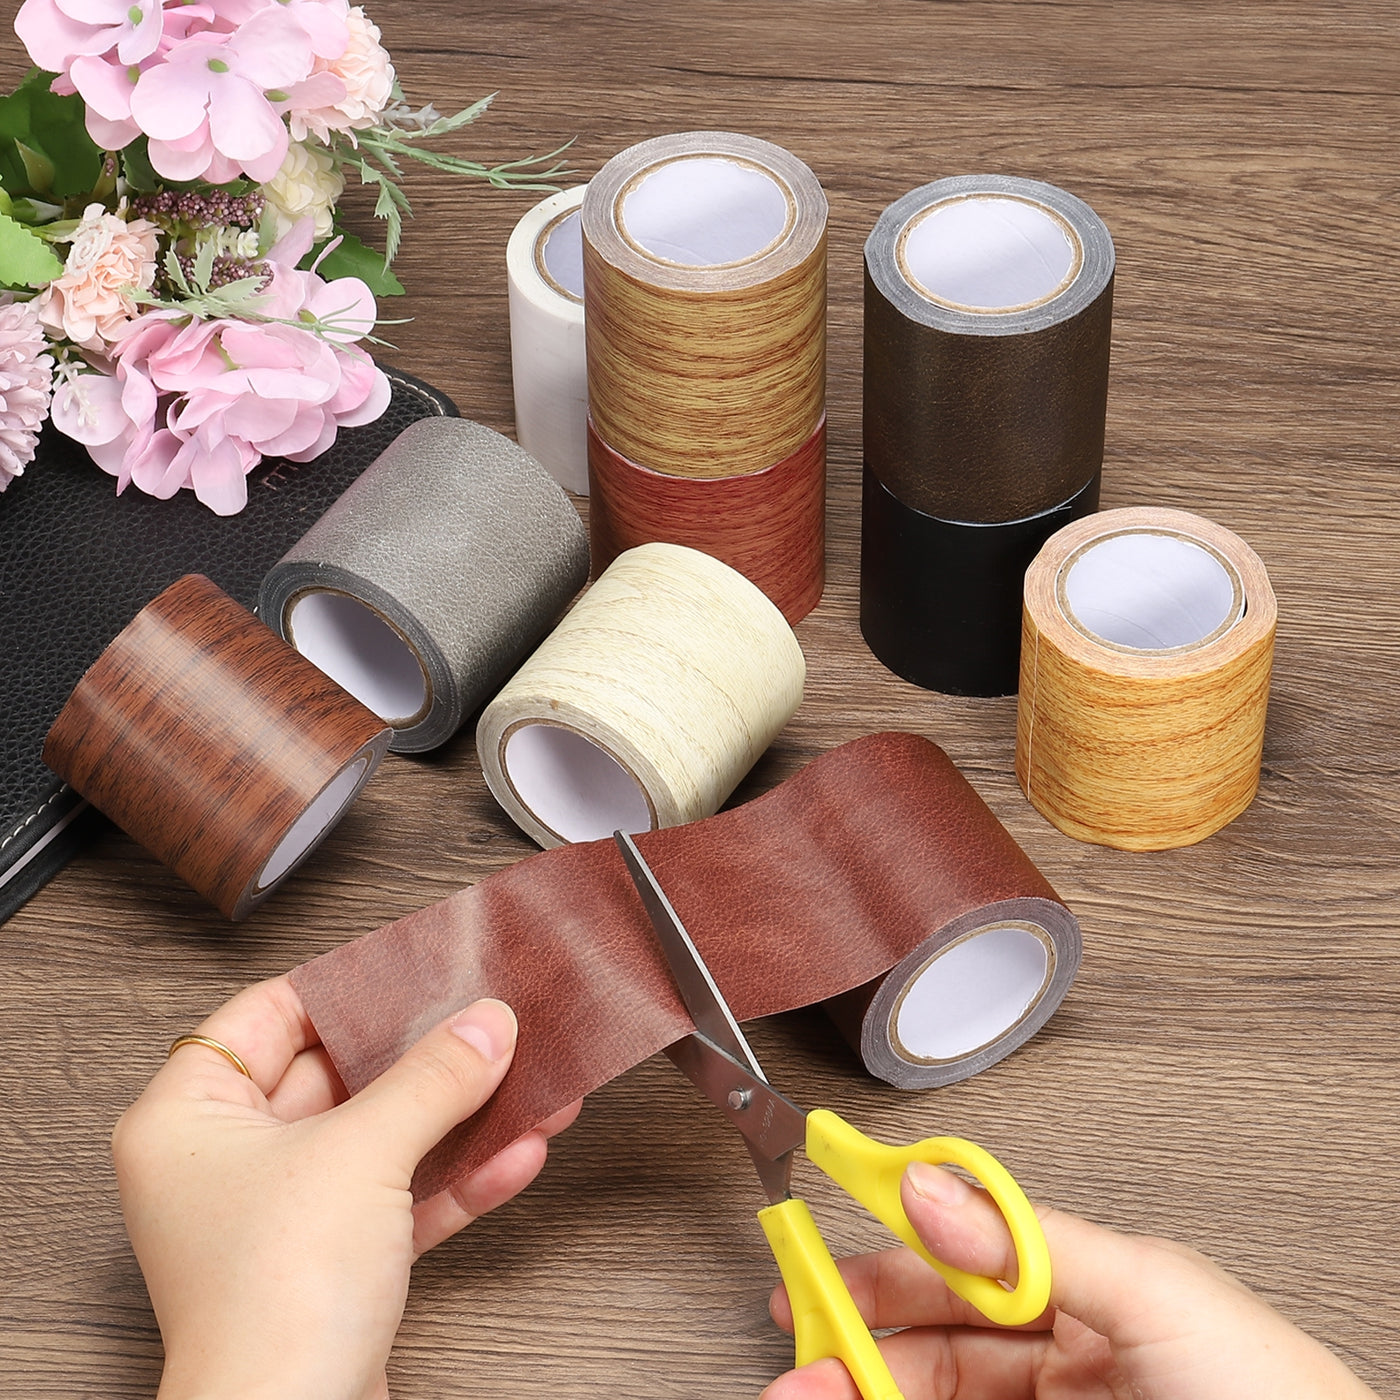 Harfington Leather Repair Tape 2.2"X30', Self Adhesive Realistic Leather Patch, Brown